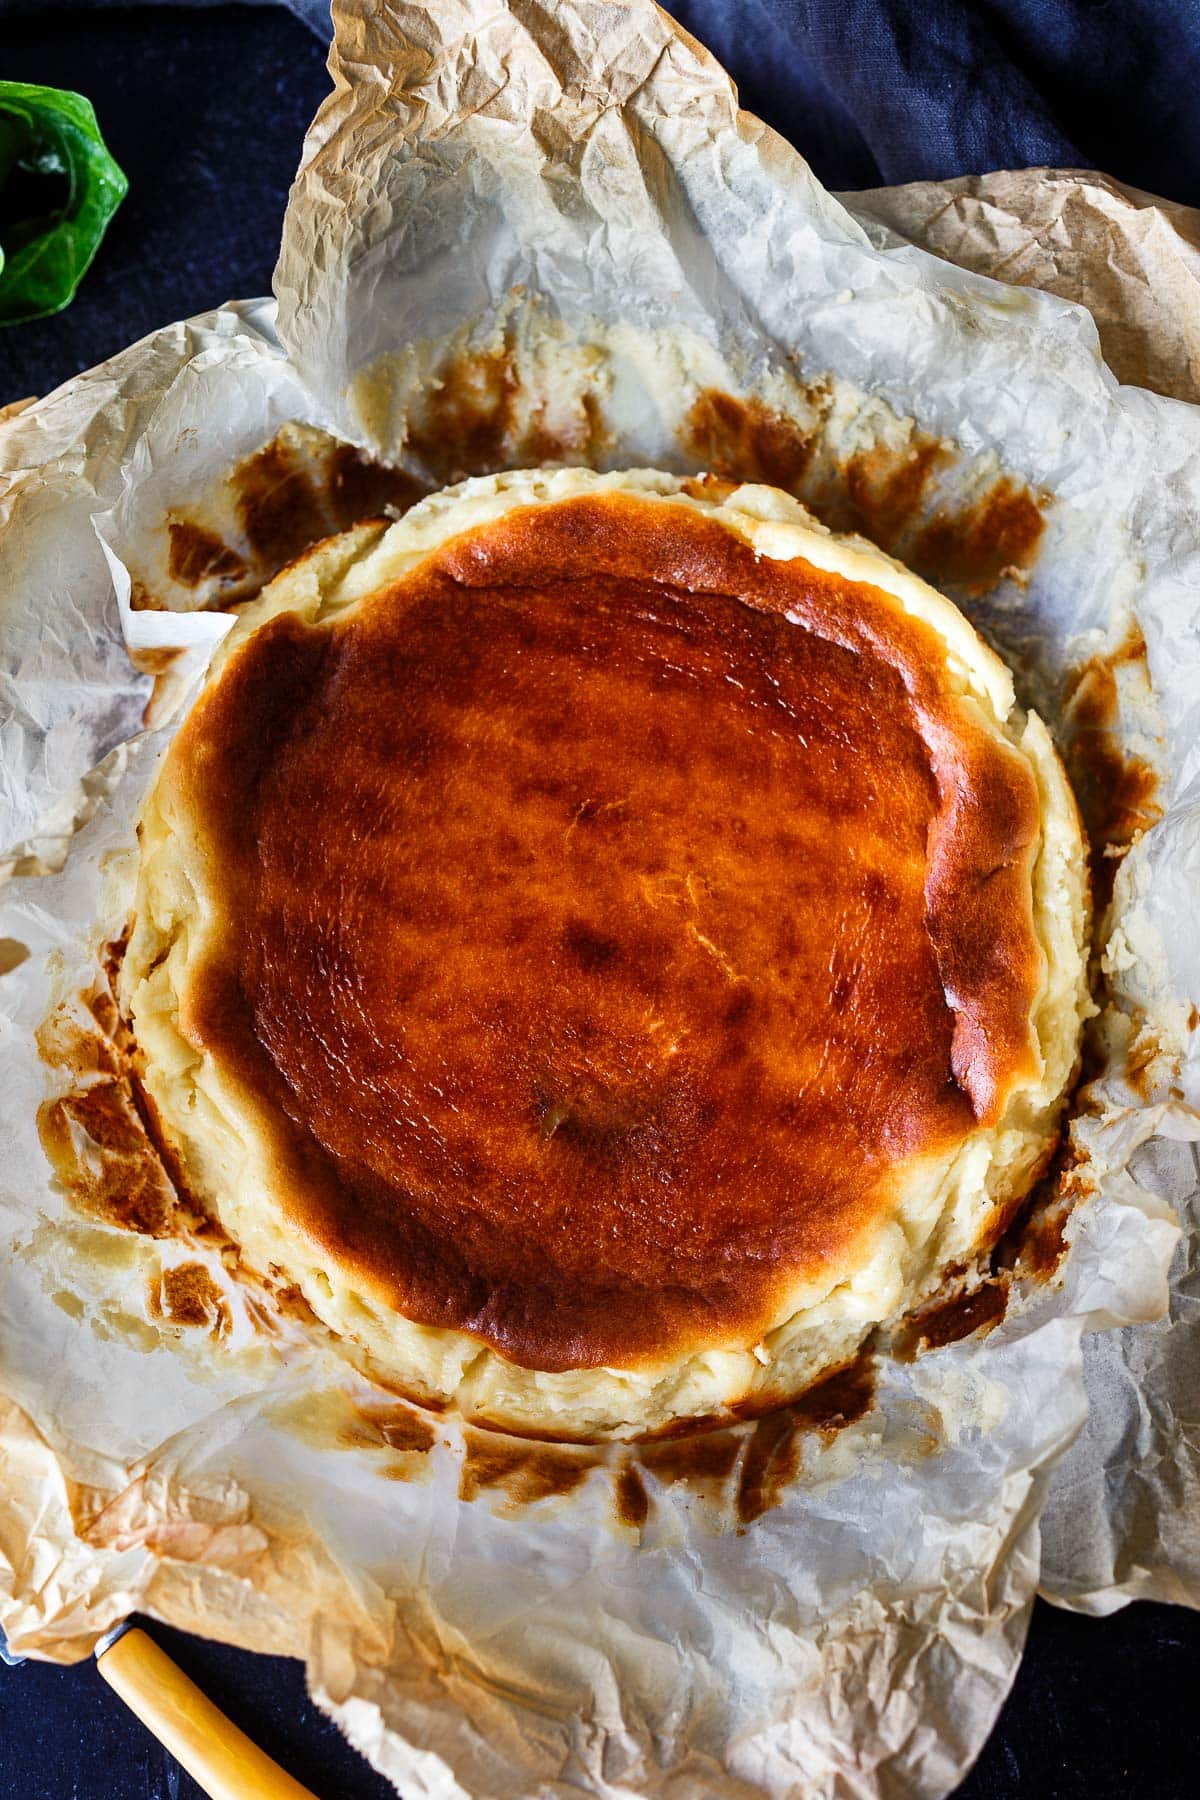 This crustless, burnt Basque Cheesecake recipe is light and airy with a caramelized top and luscious notes of vanilla. A rustic dessert that is easy to make. 